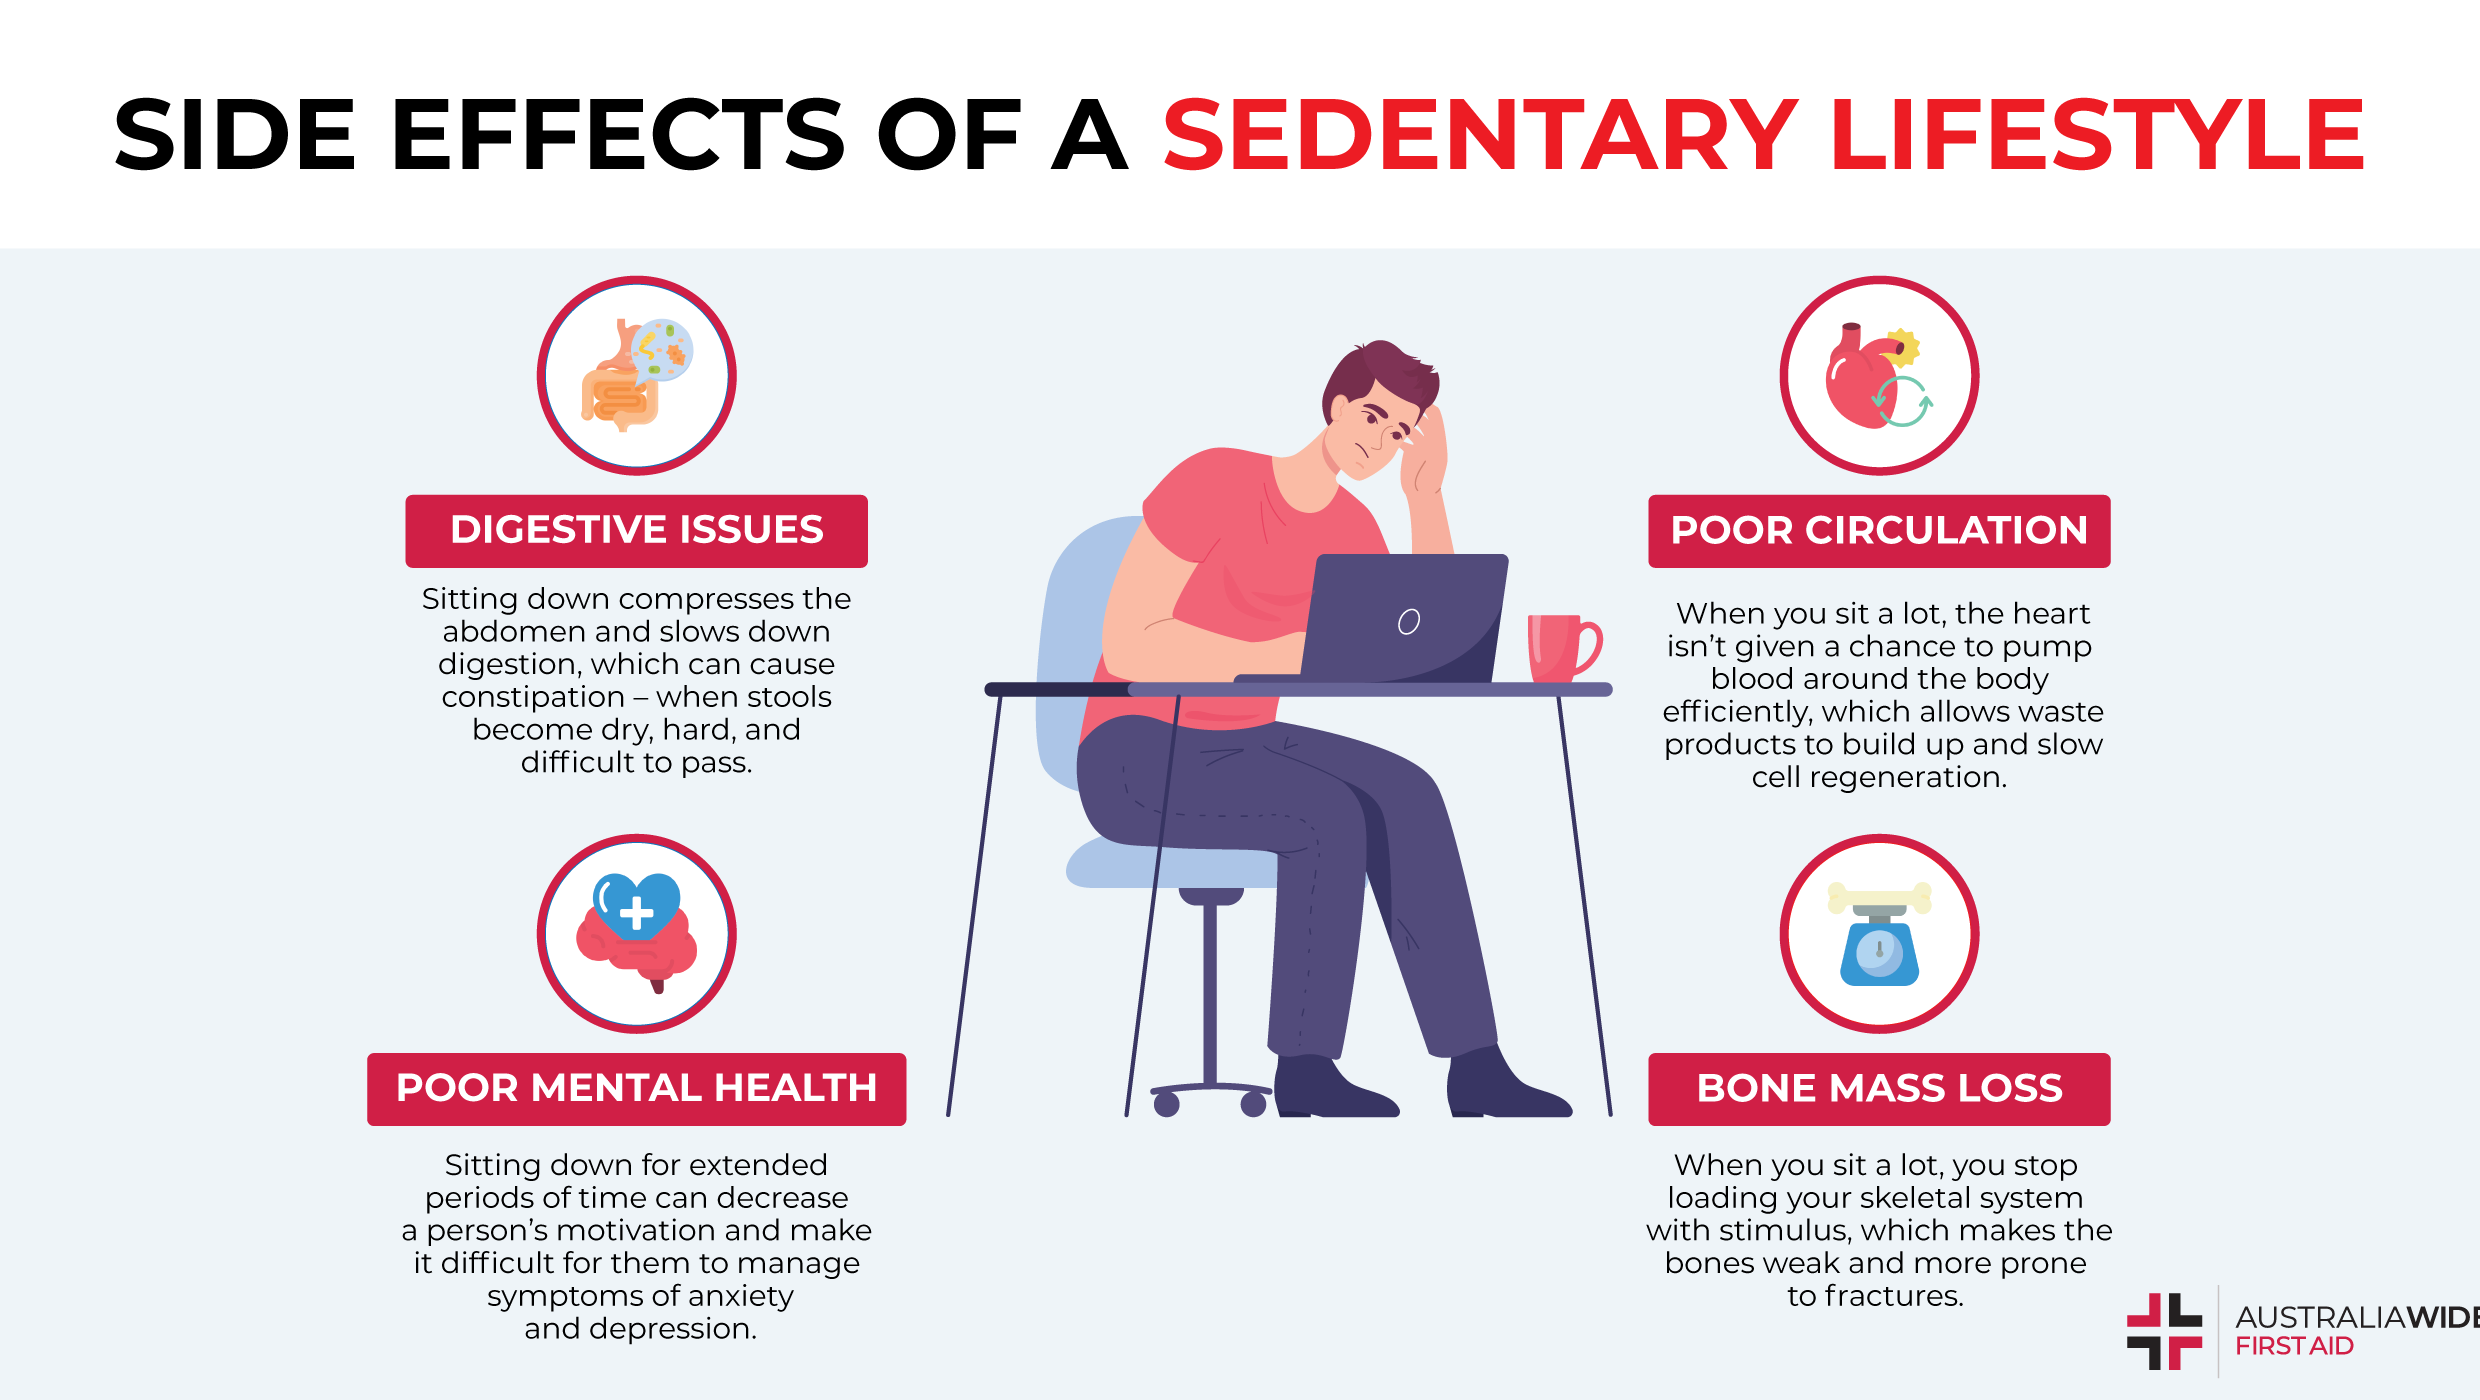 Dangers of a sedentary lifestyle